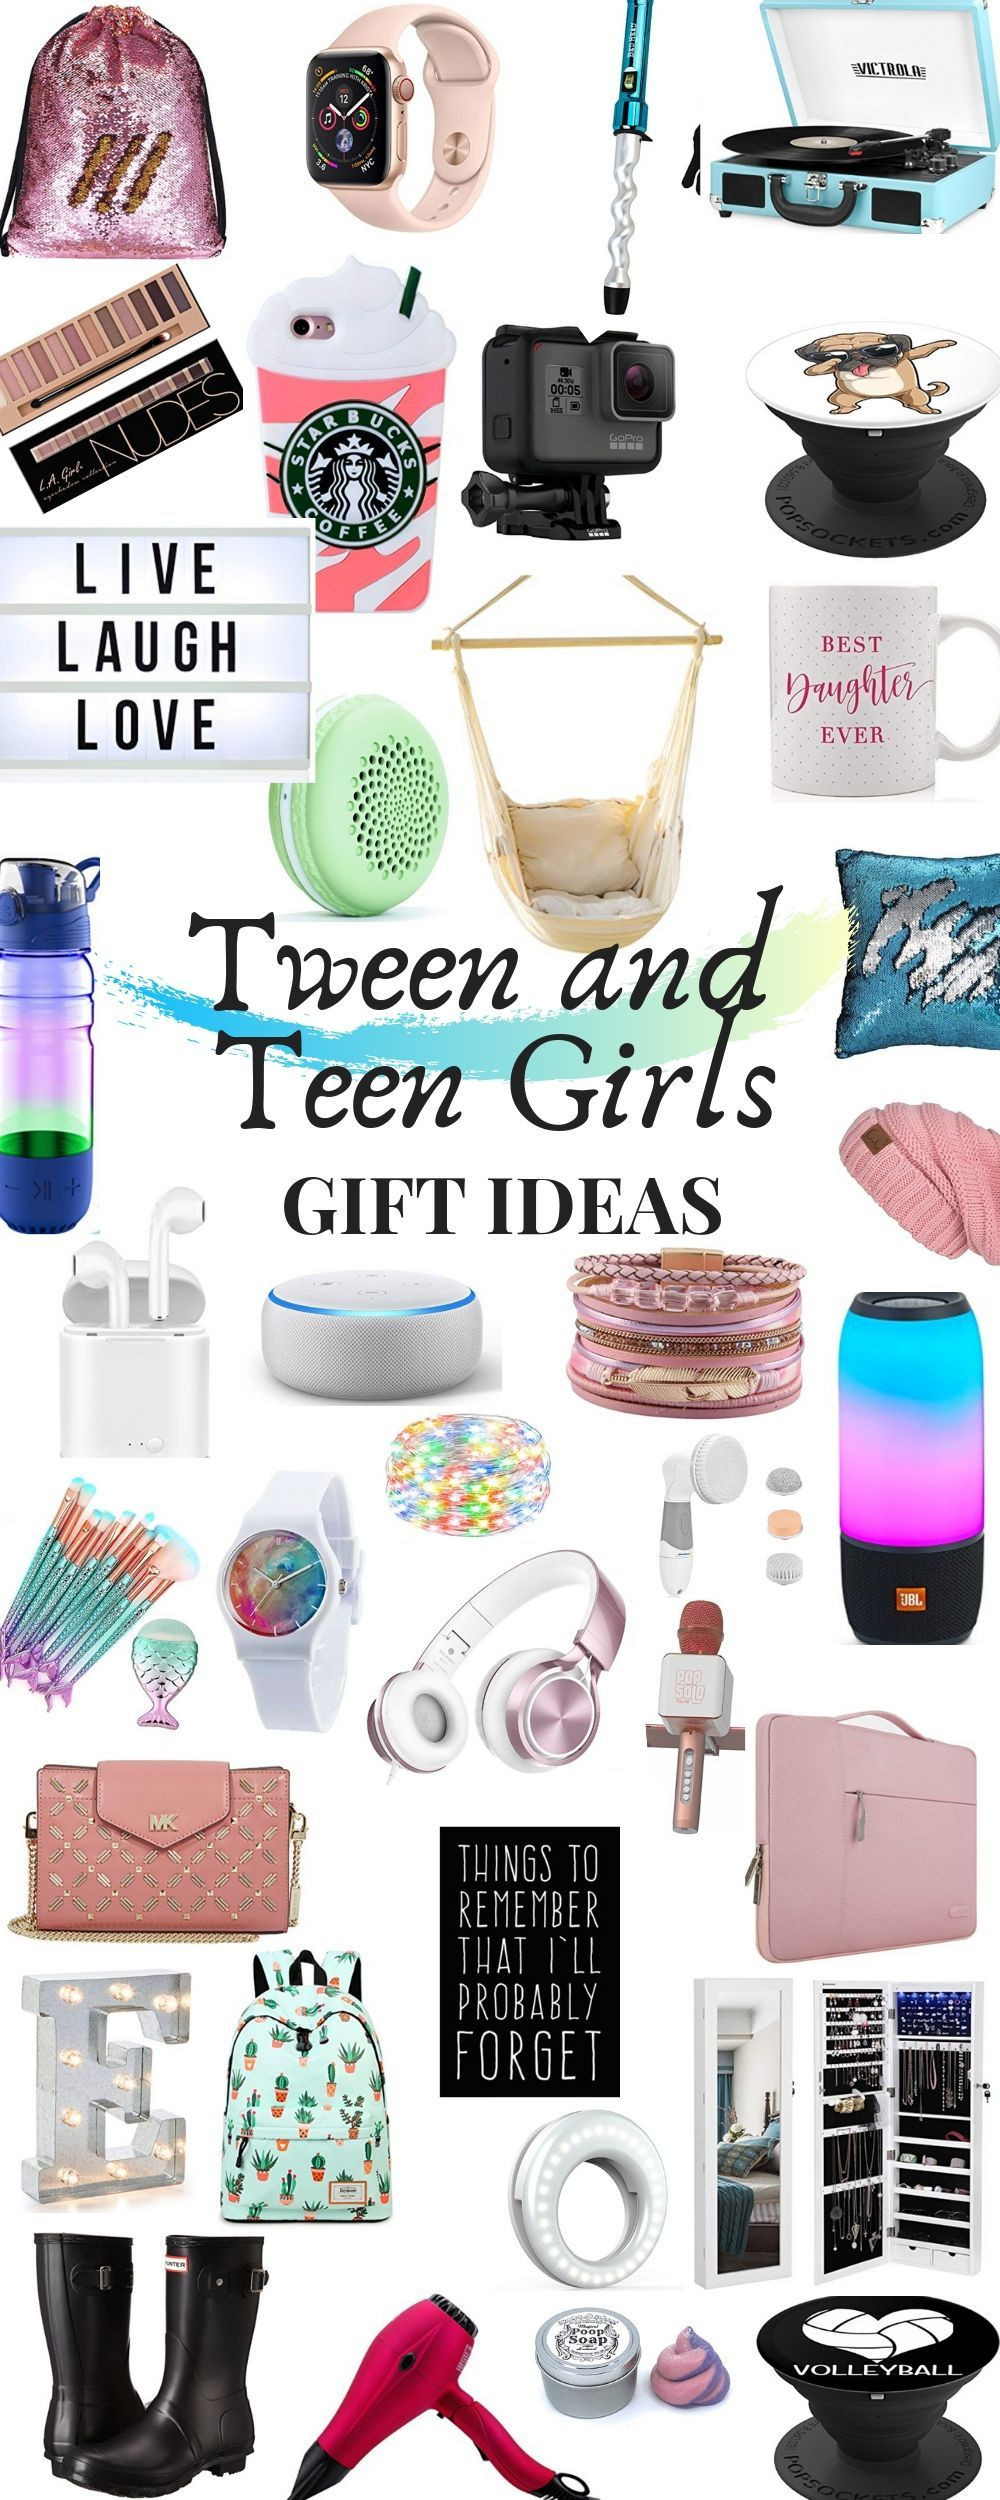 Cool Gift Ideas For Girlfriend
 Pin on Gift Ideas for Teenagers